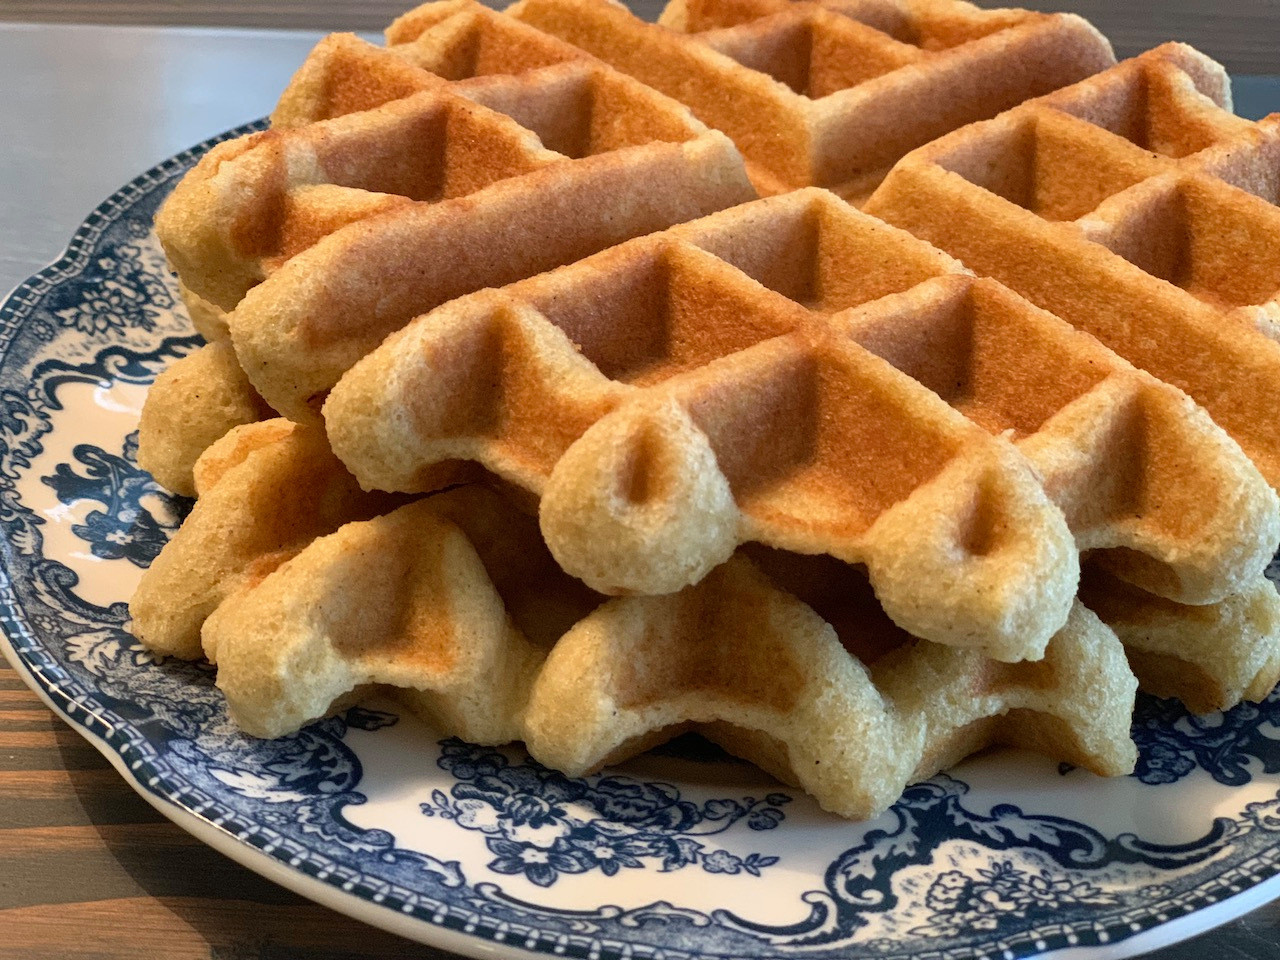 Keto Breakfast Waffles
 The BEST Most Delicious Low Carb Keto Waffle Recipe EVER